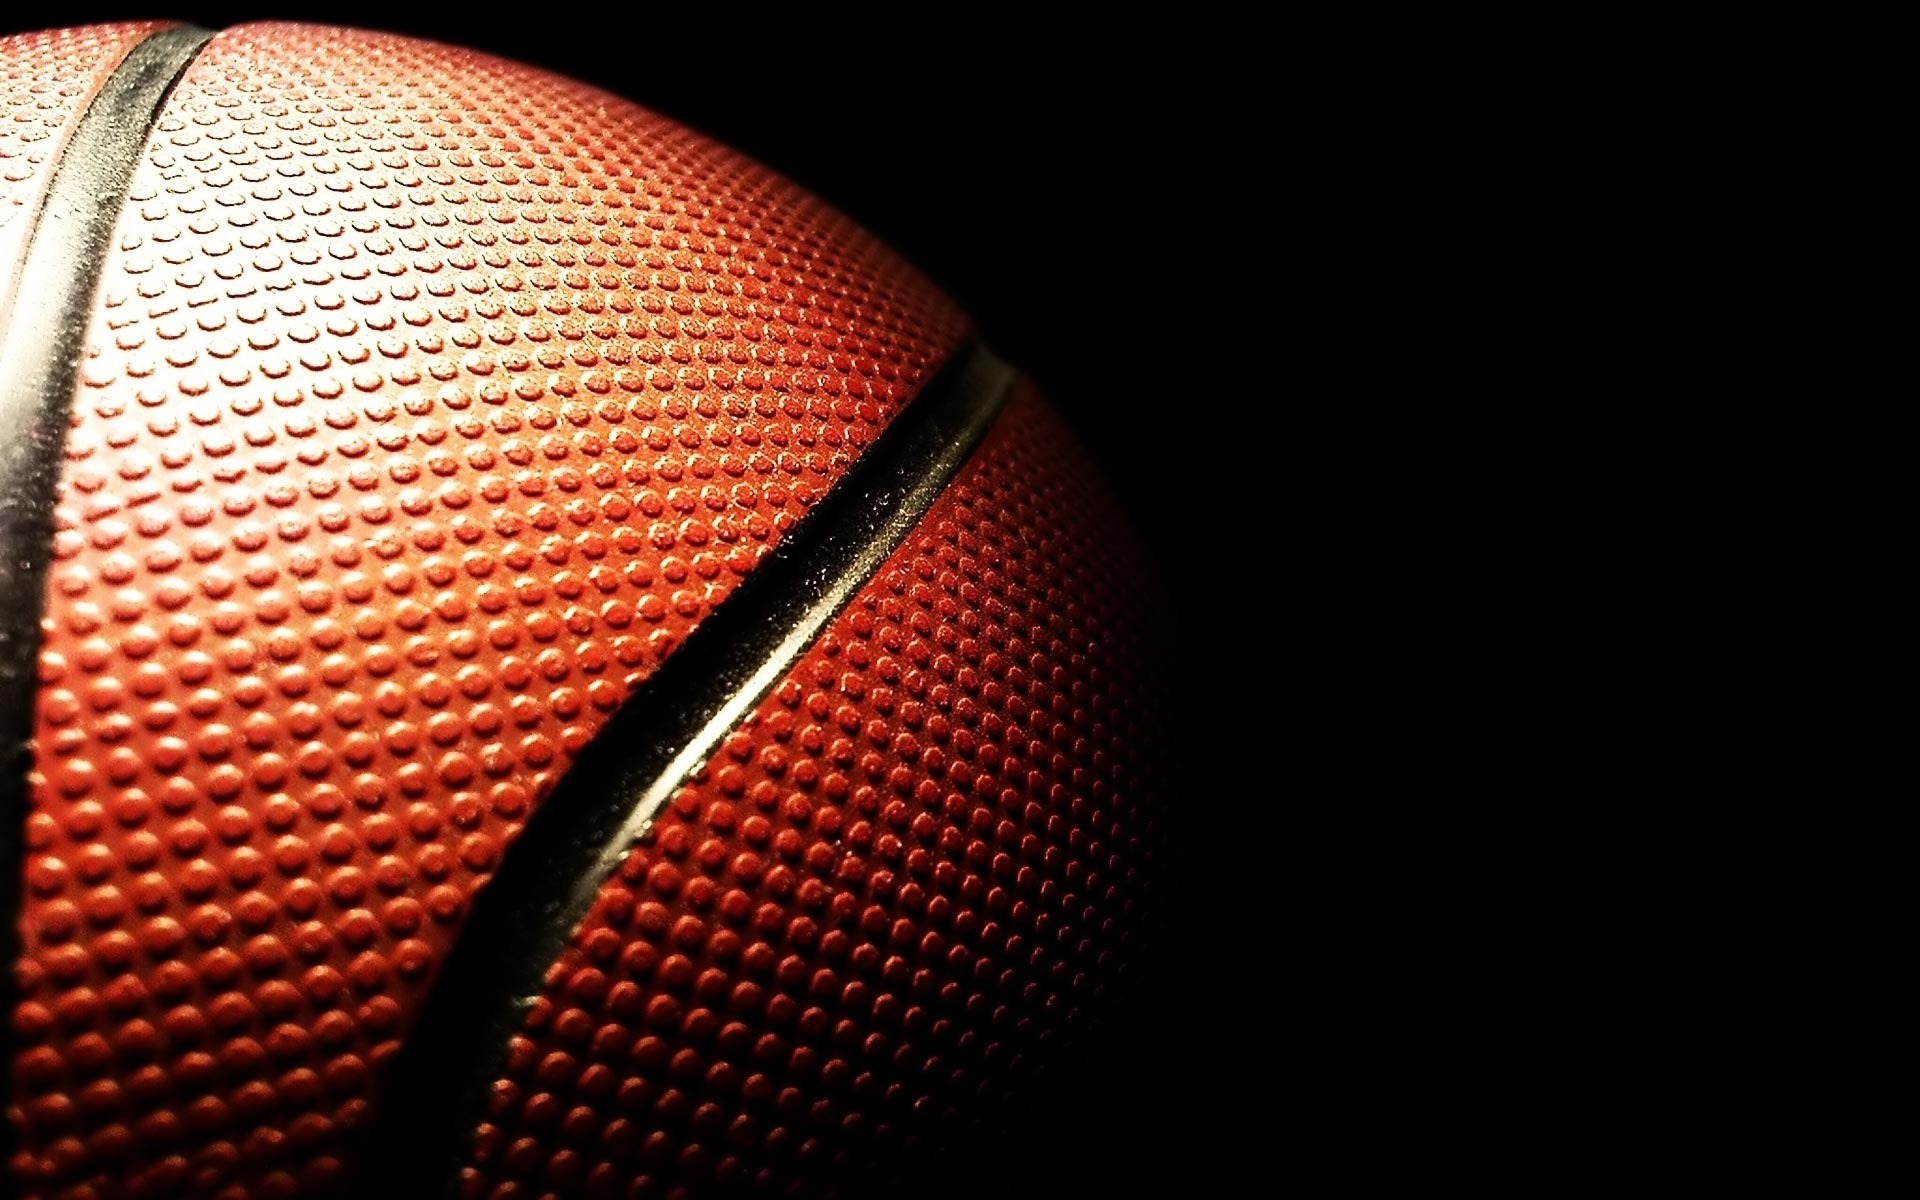 Cute Basketball Wallpapers Wallpapers